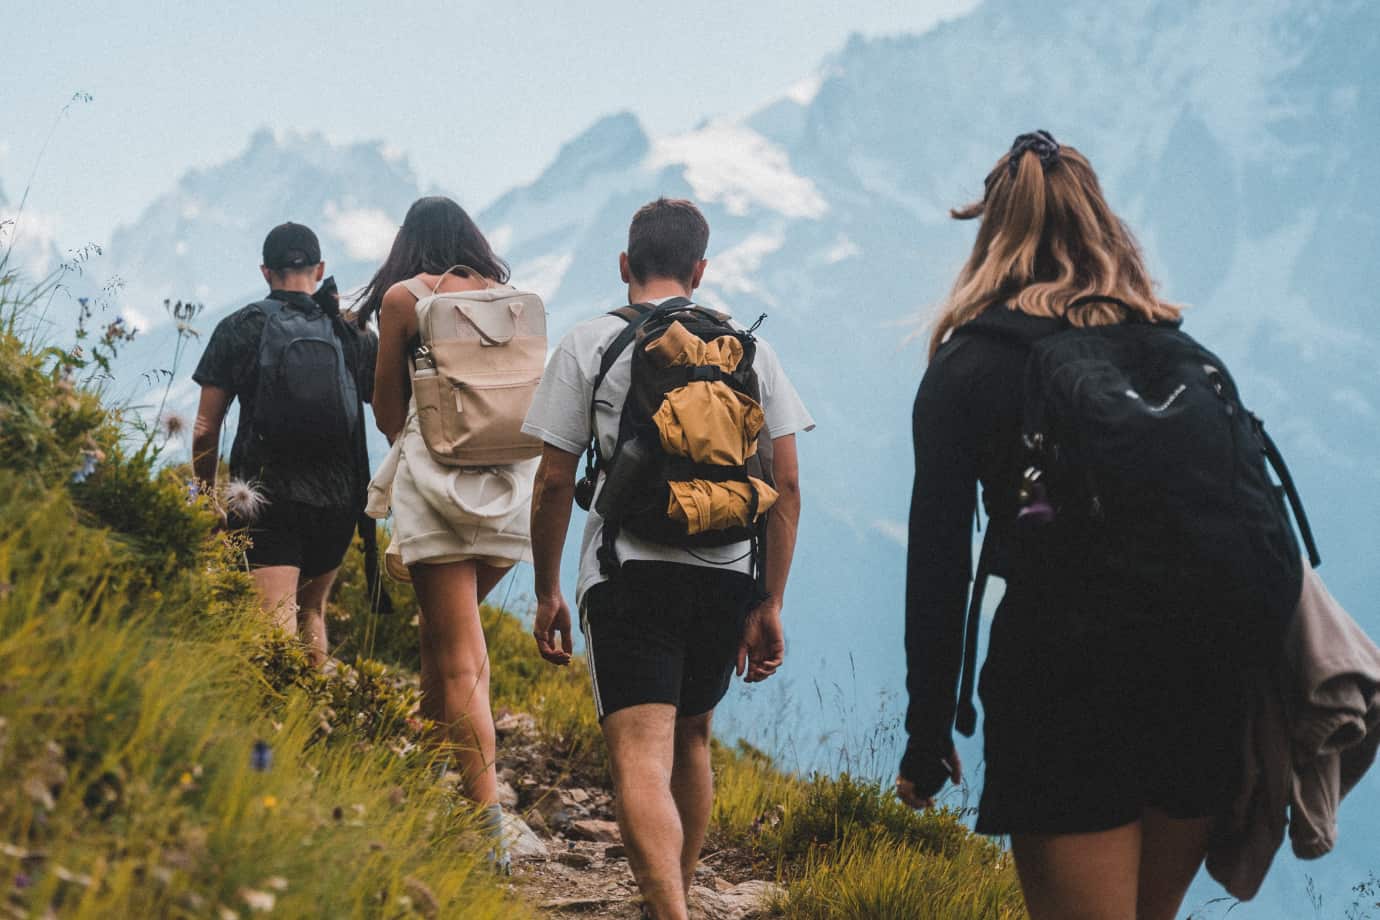 Group of people backpacking